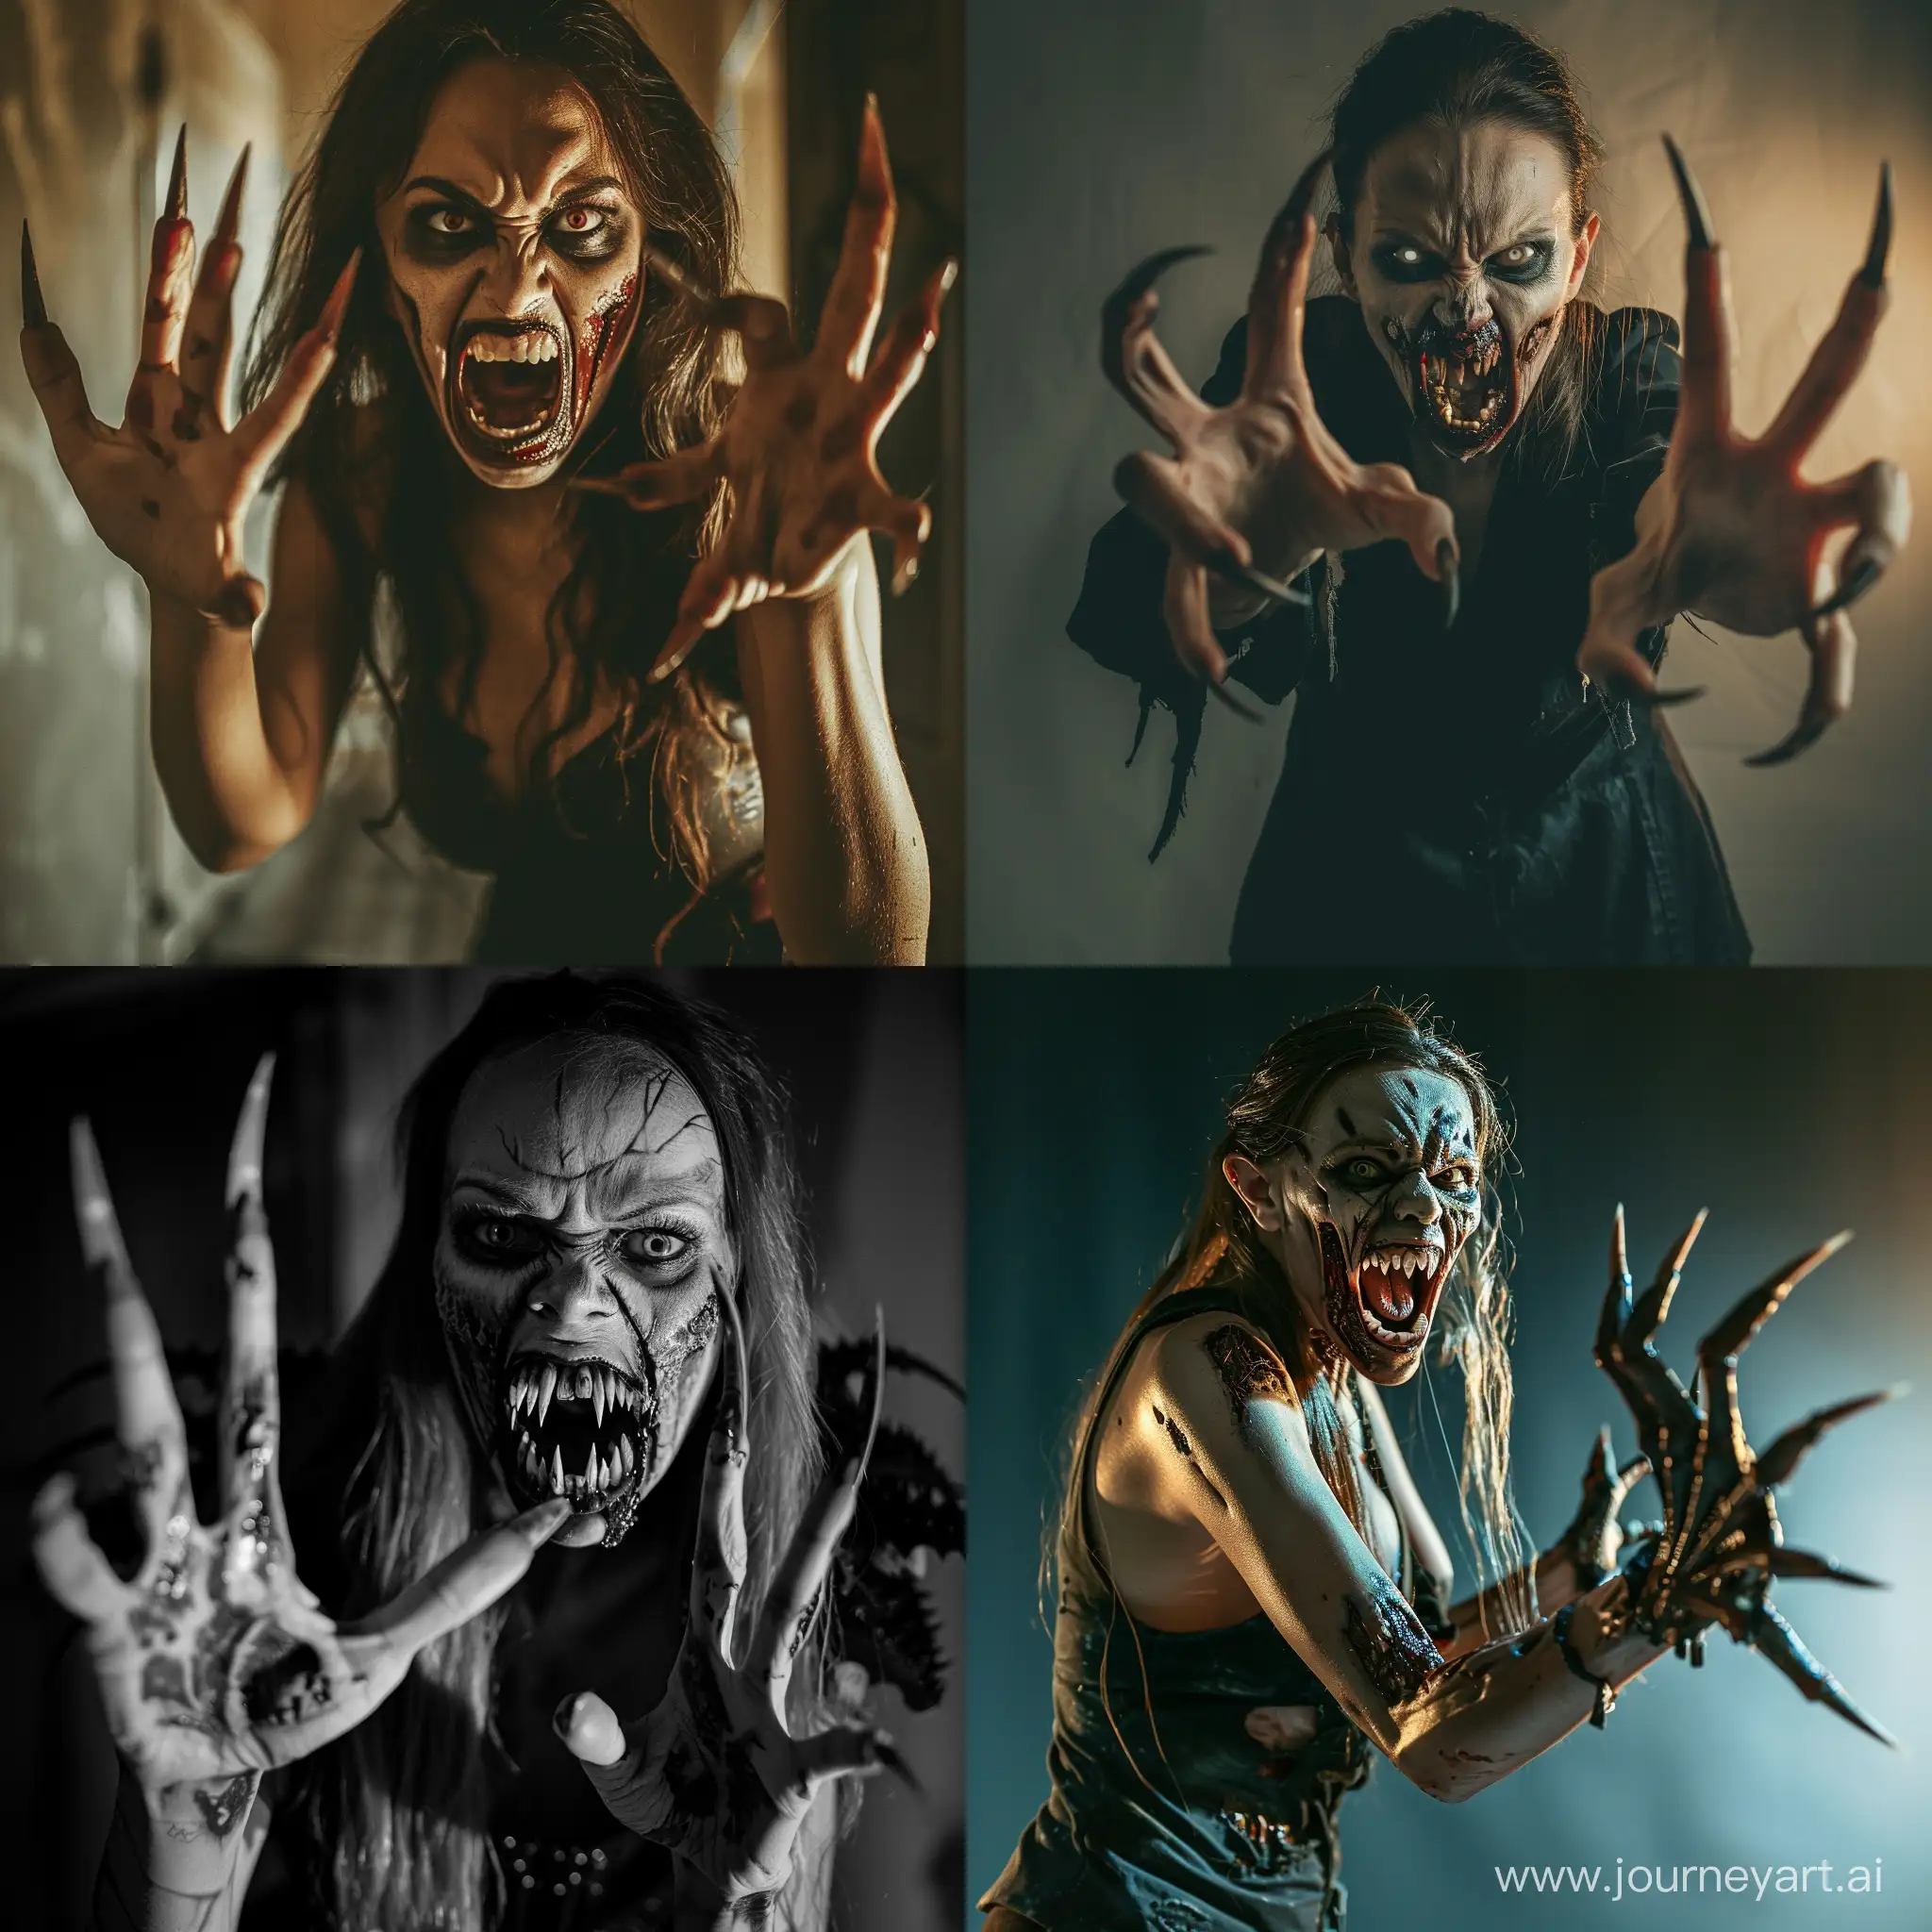 Menacing-Zombie-Woman-with-Sharp-Fangs-and-Clawed-Hands